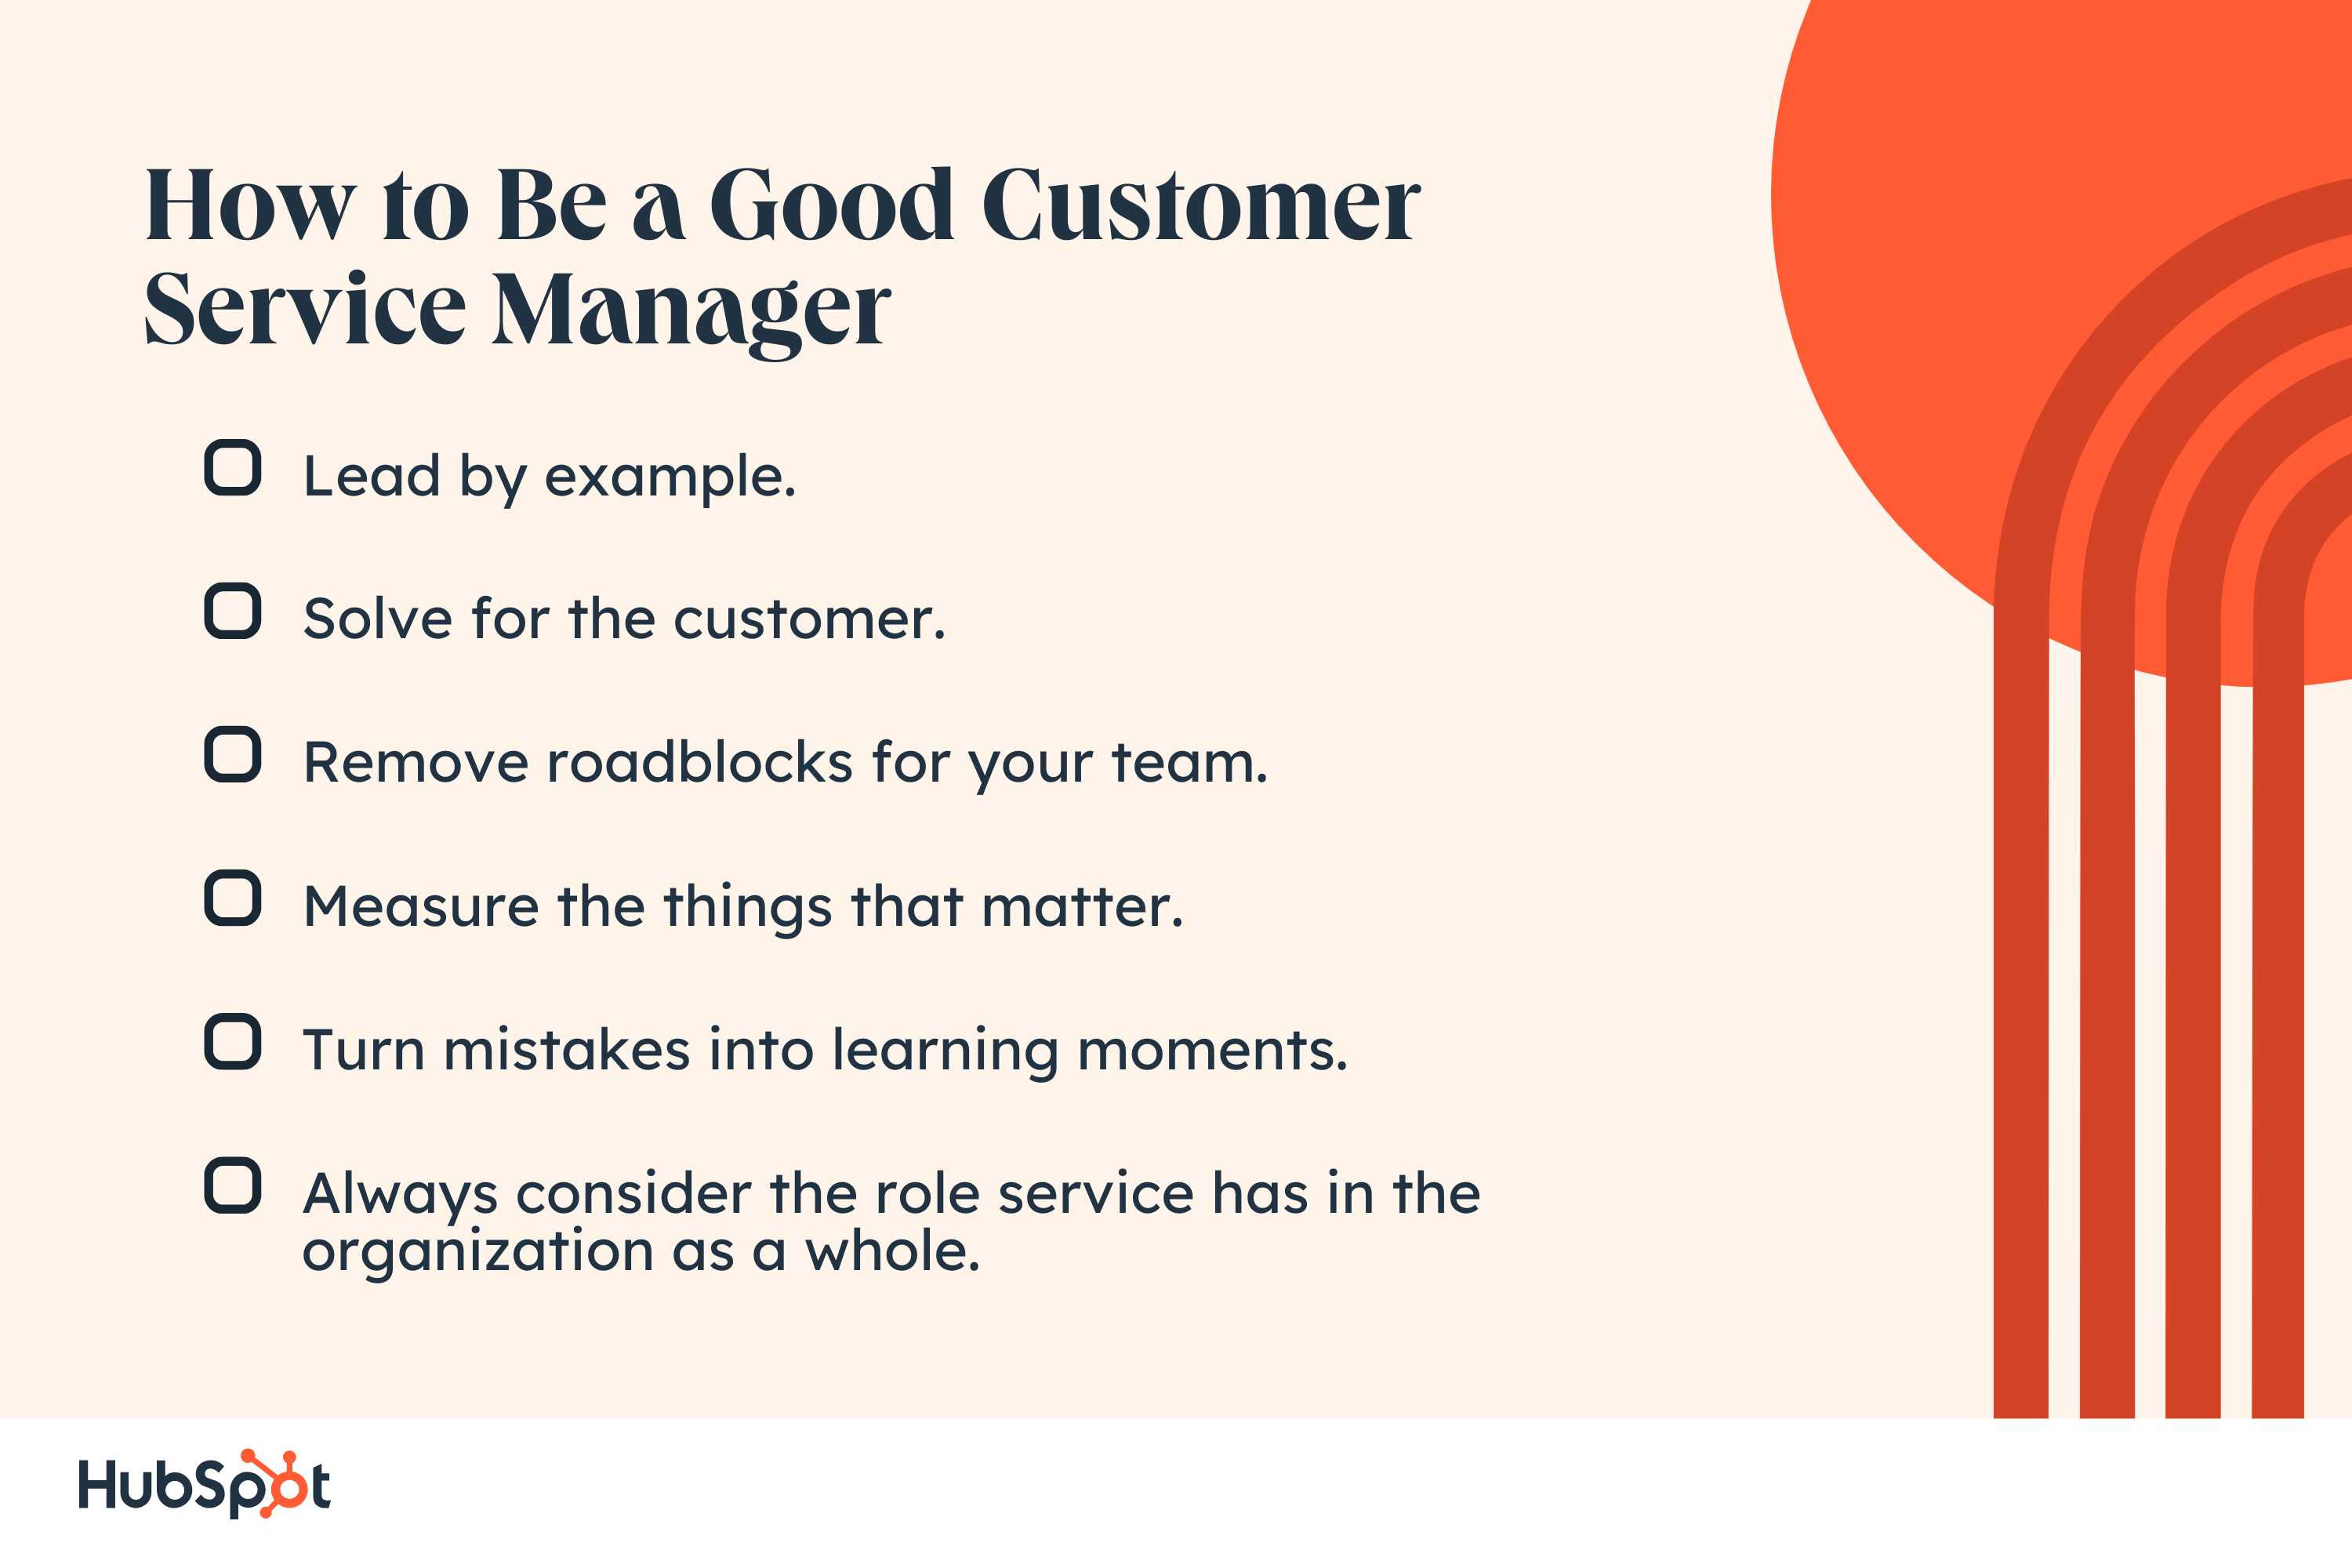 How to Be a Good Customer Service Manager. Lead by example. Solve for the customer. Remove roadblocks for your team. Measure the things that matter. Turn mistakes into learning moments. Always consider the role service has in the organization as a whole.